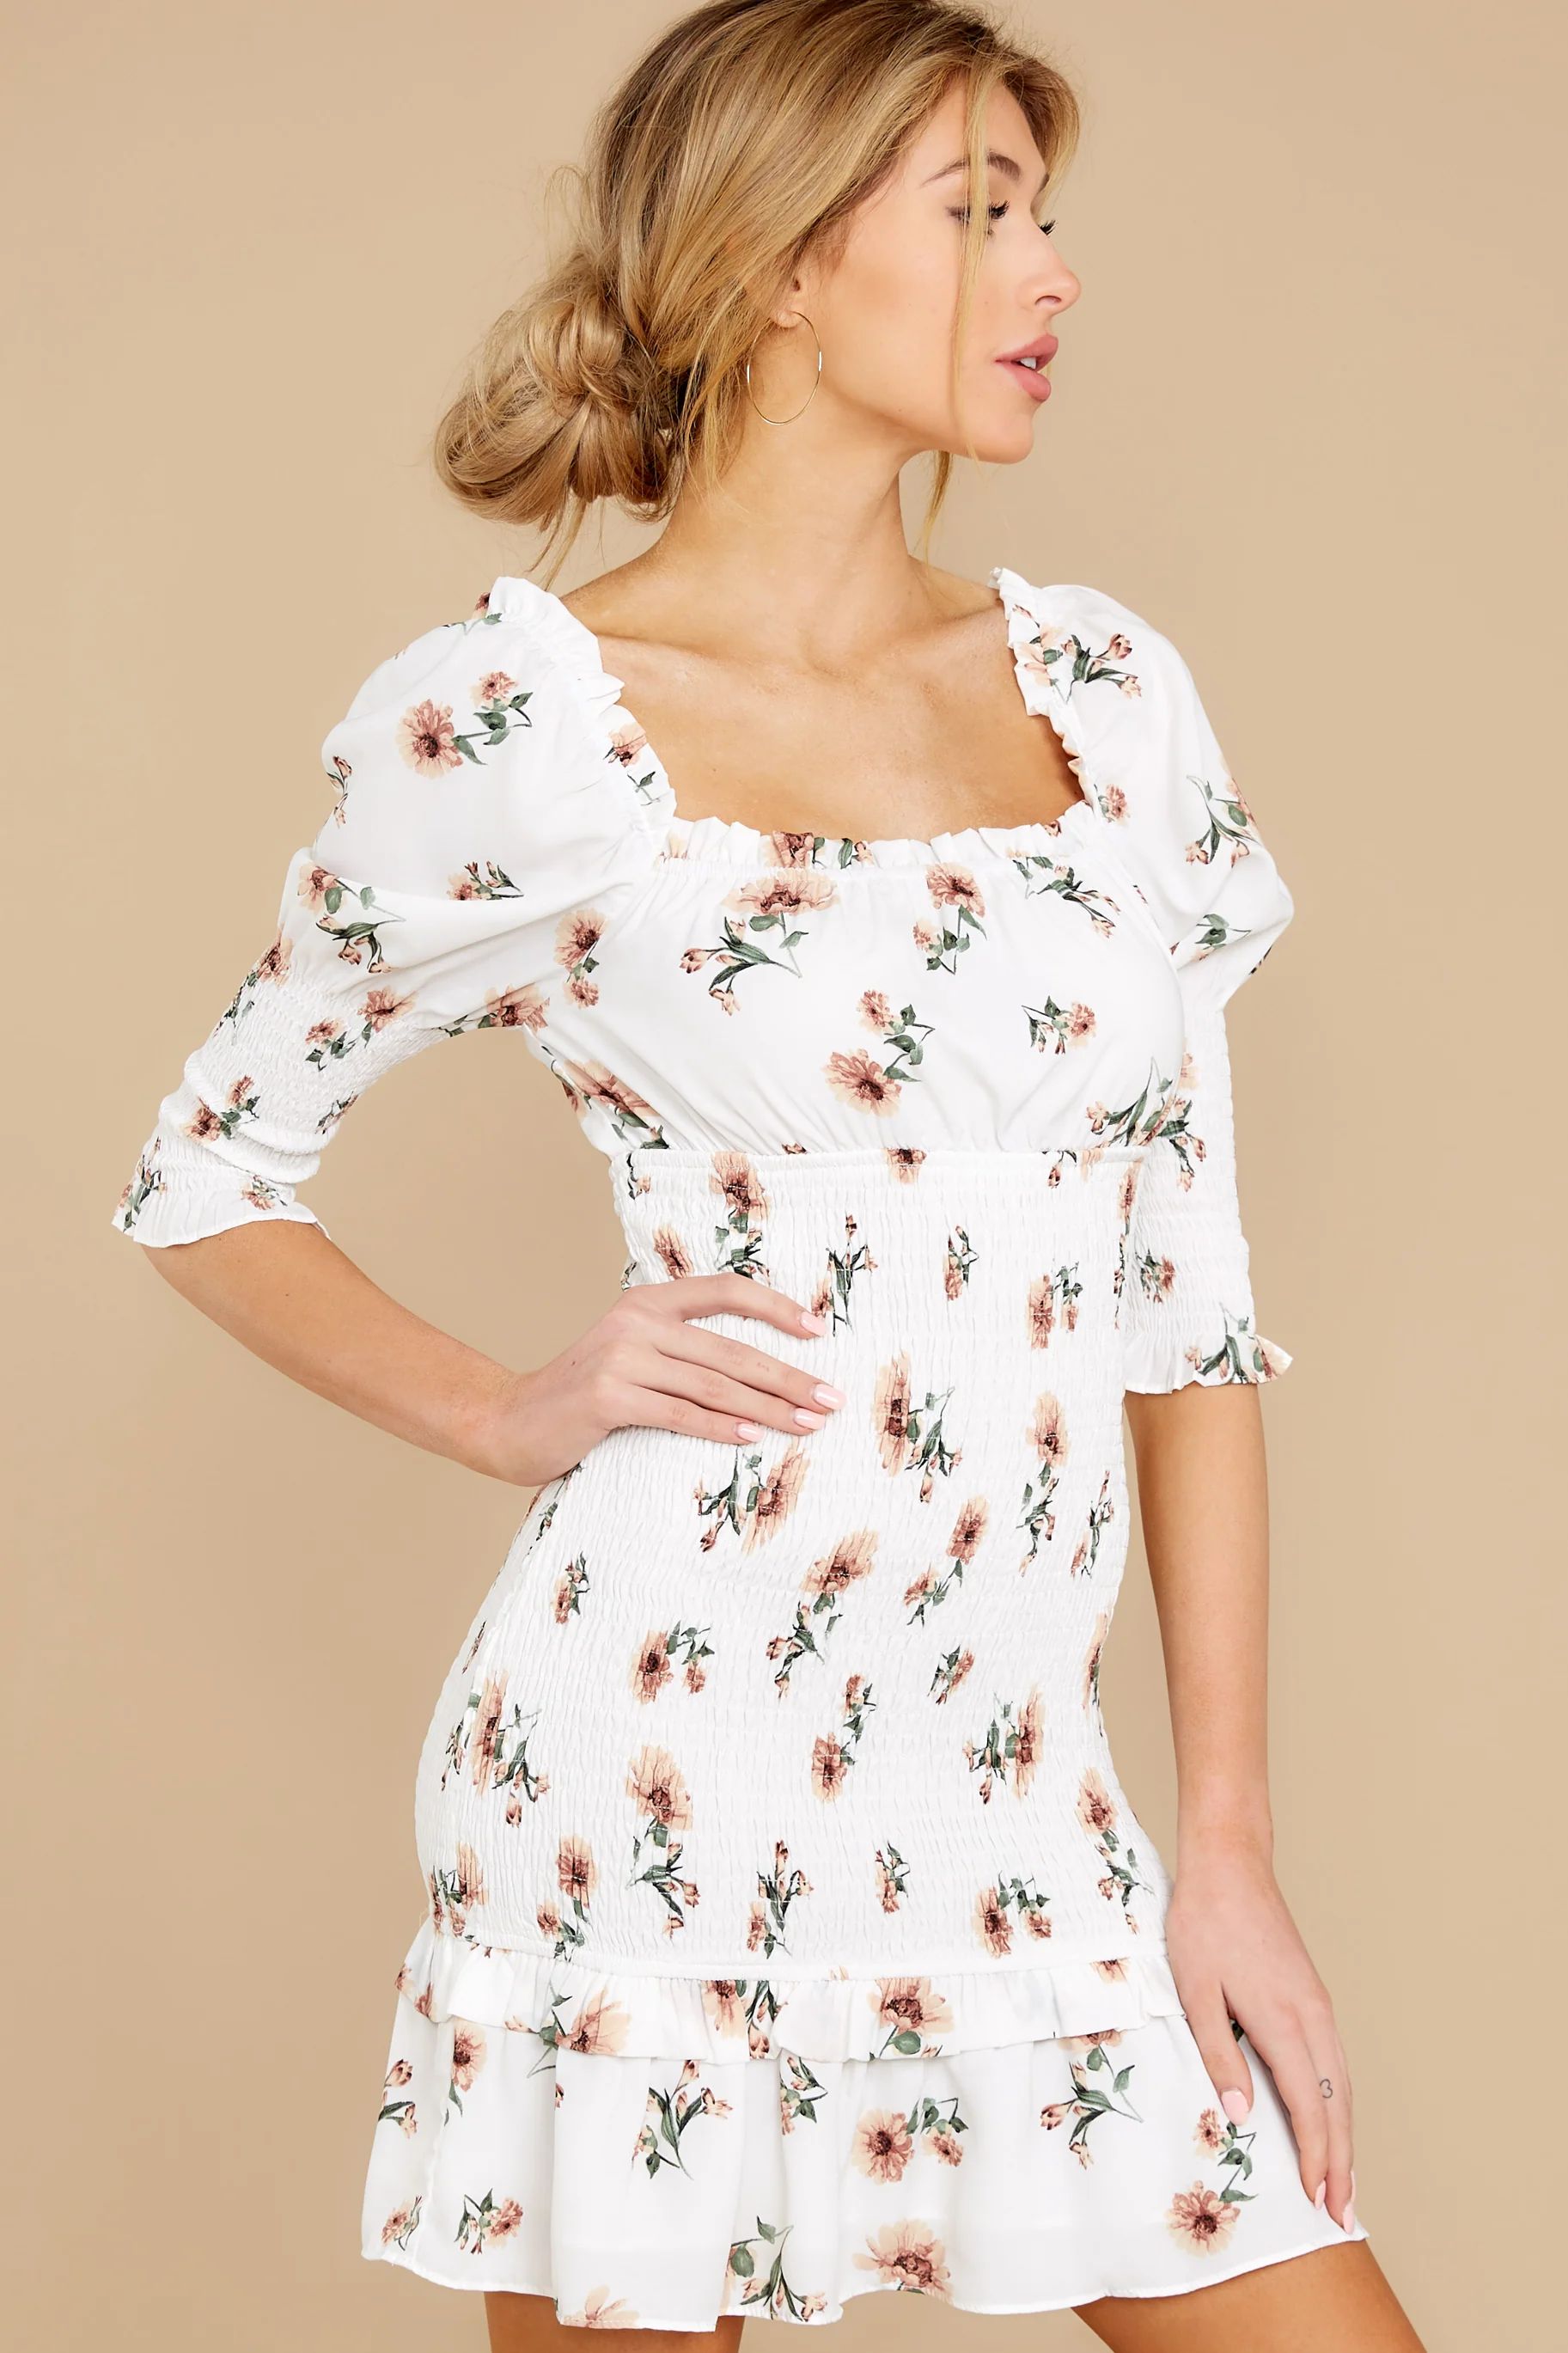 You And Me White Floral Print Dress | Red Dress 